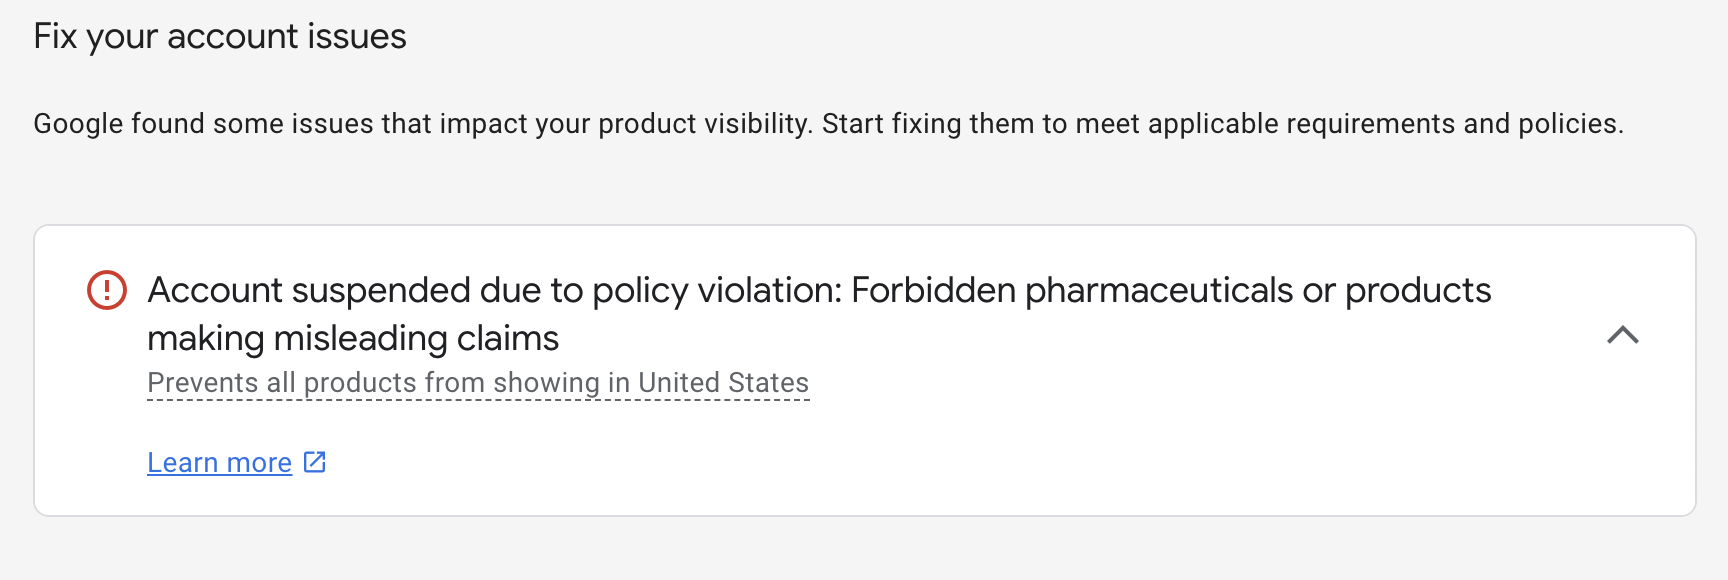 Forbidden pharmaceuticals or products making misleading claims - Google Merchant Center